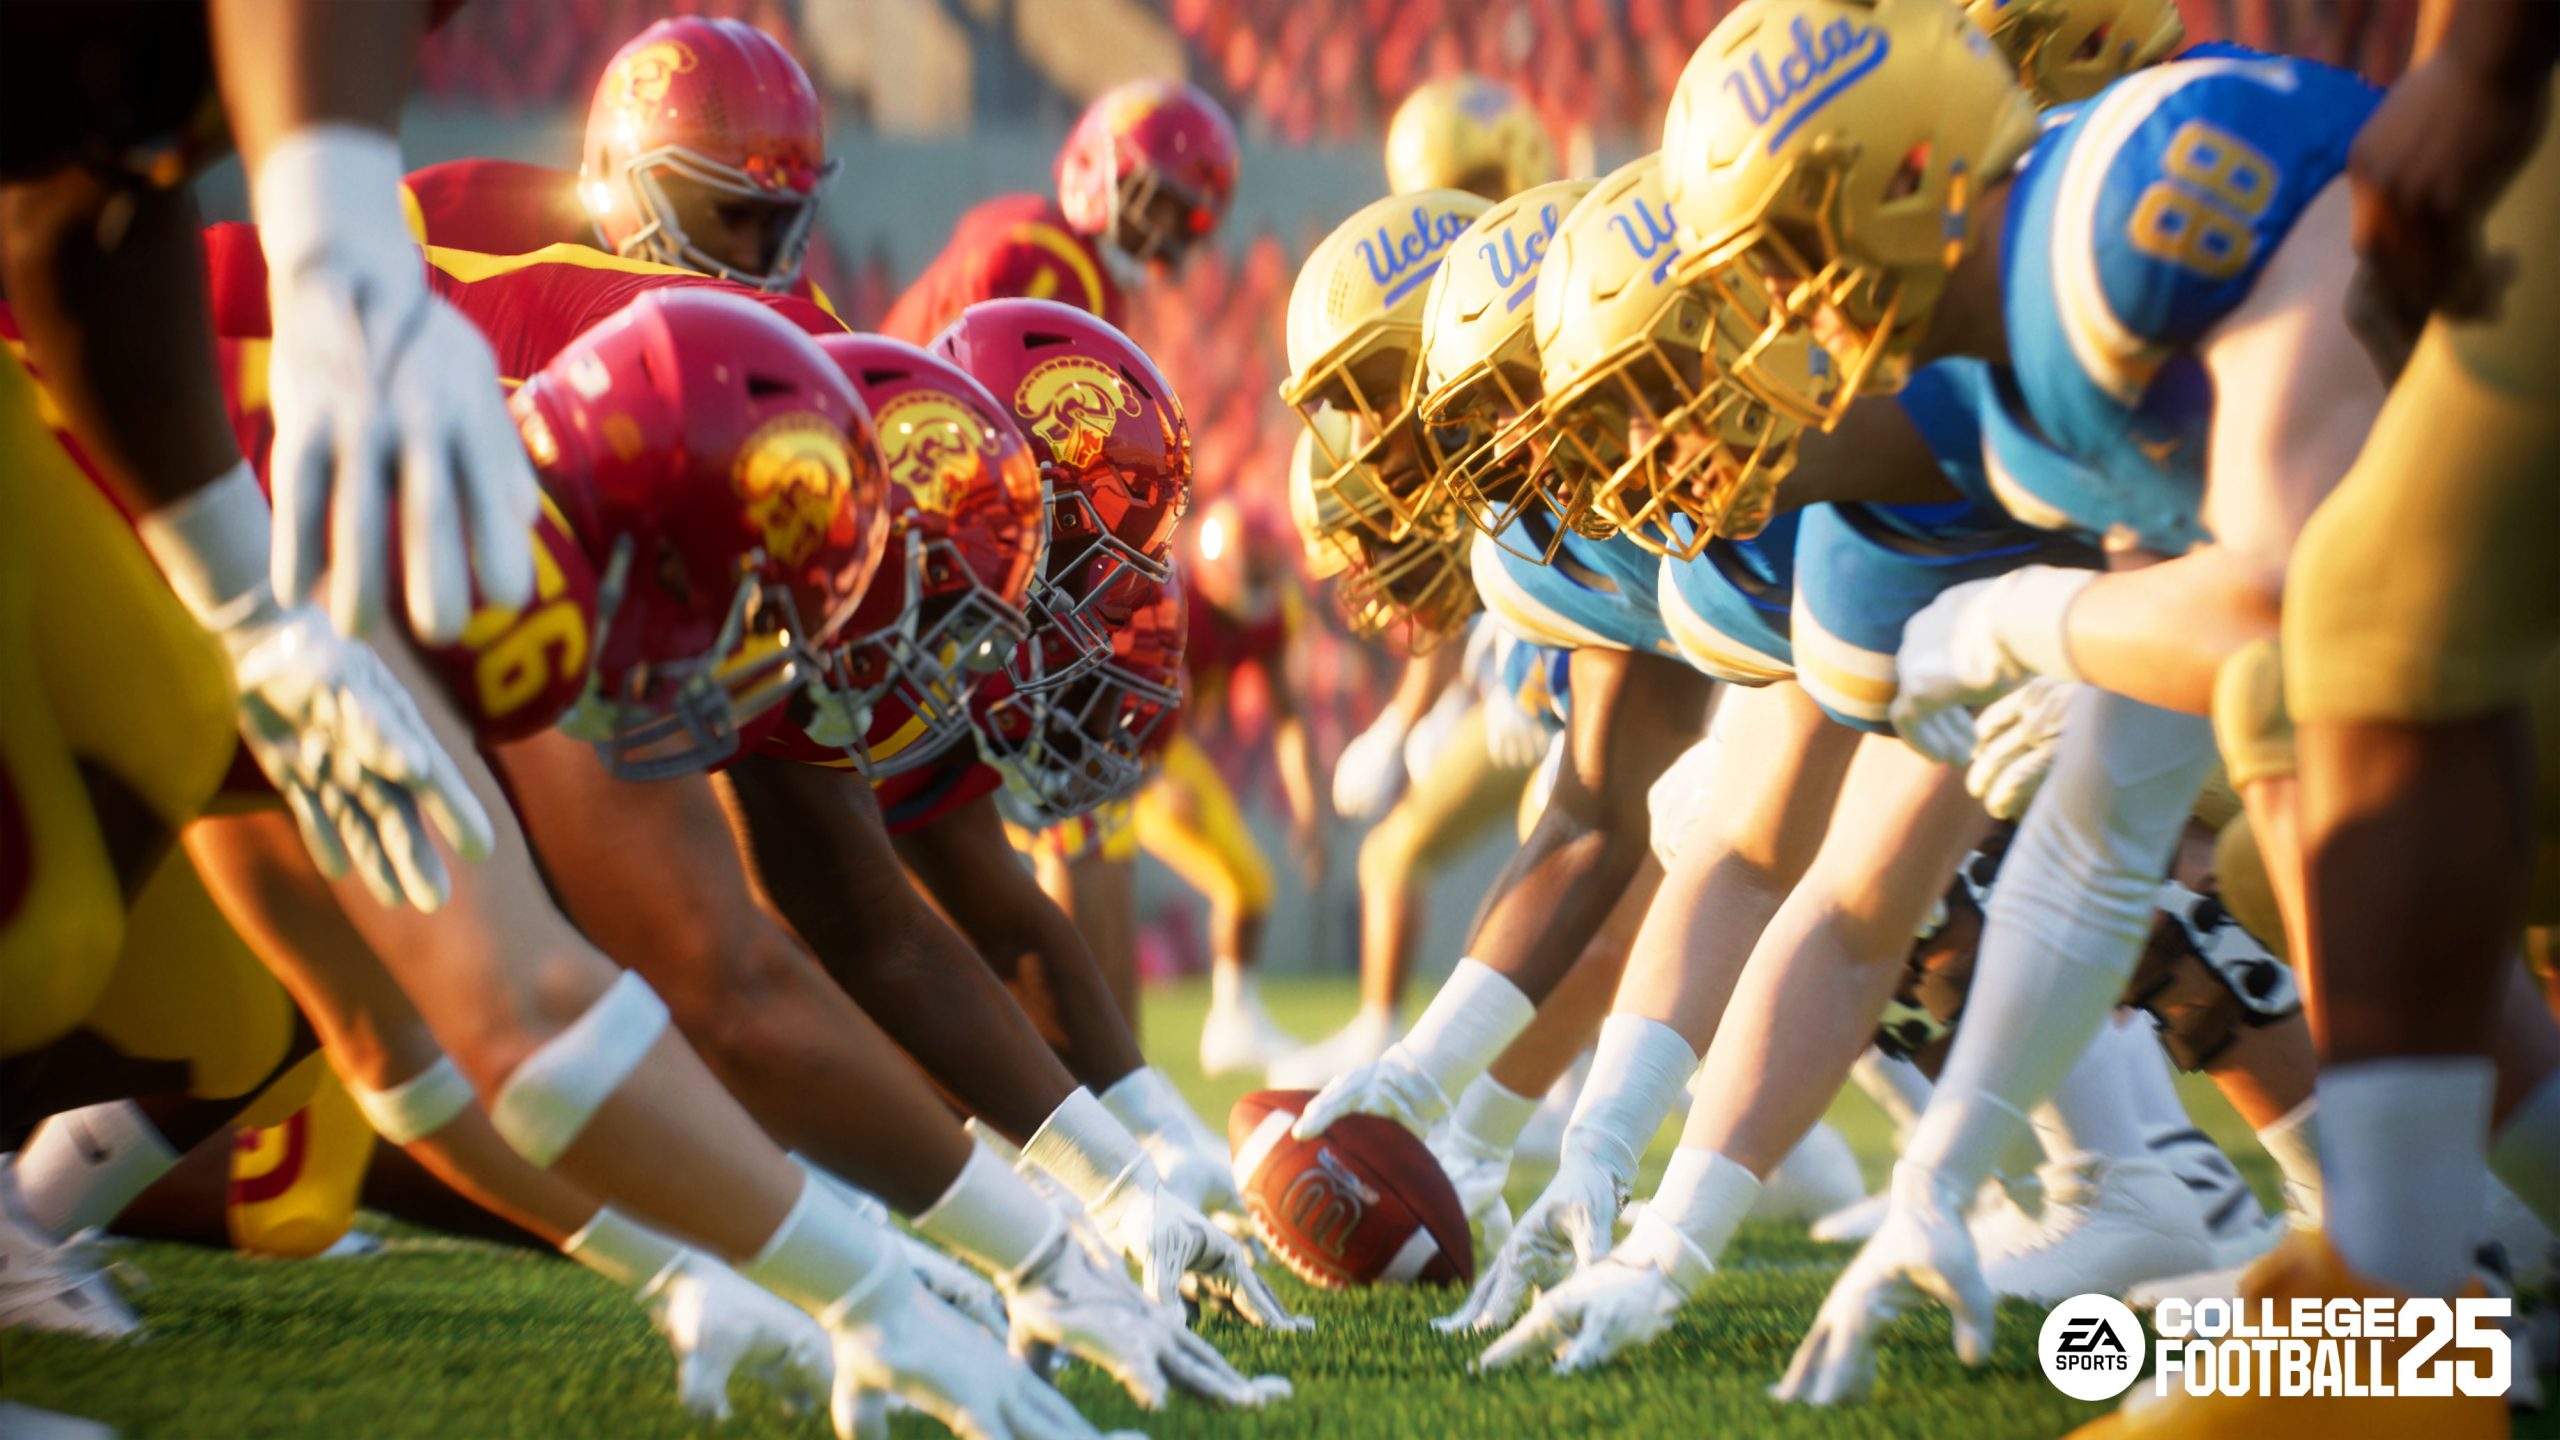 USC and UCLA's lines meet at the line of scrimmage in College Football 25